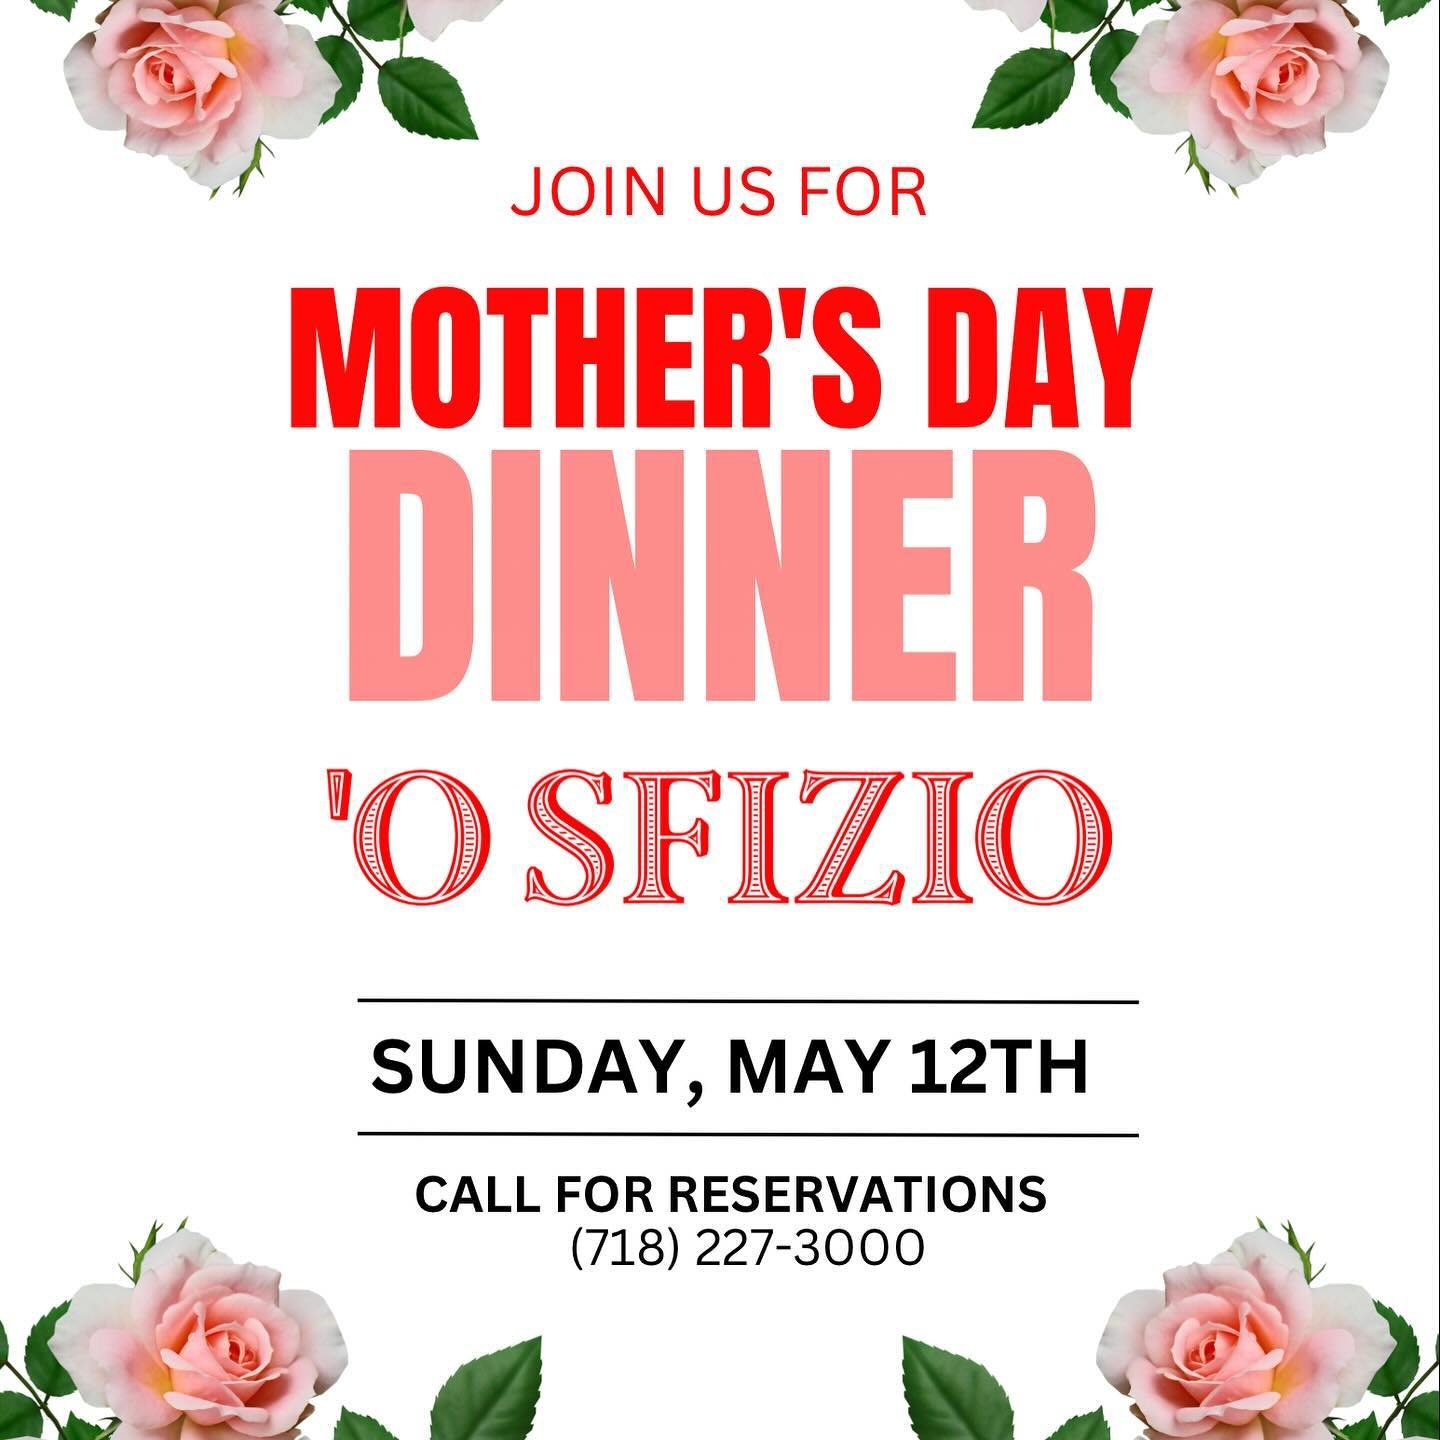 Join Us for a Special Mother&rsquo;s Day Dinner on Sunday, May 12 - Reservations Required!